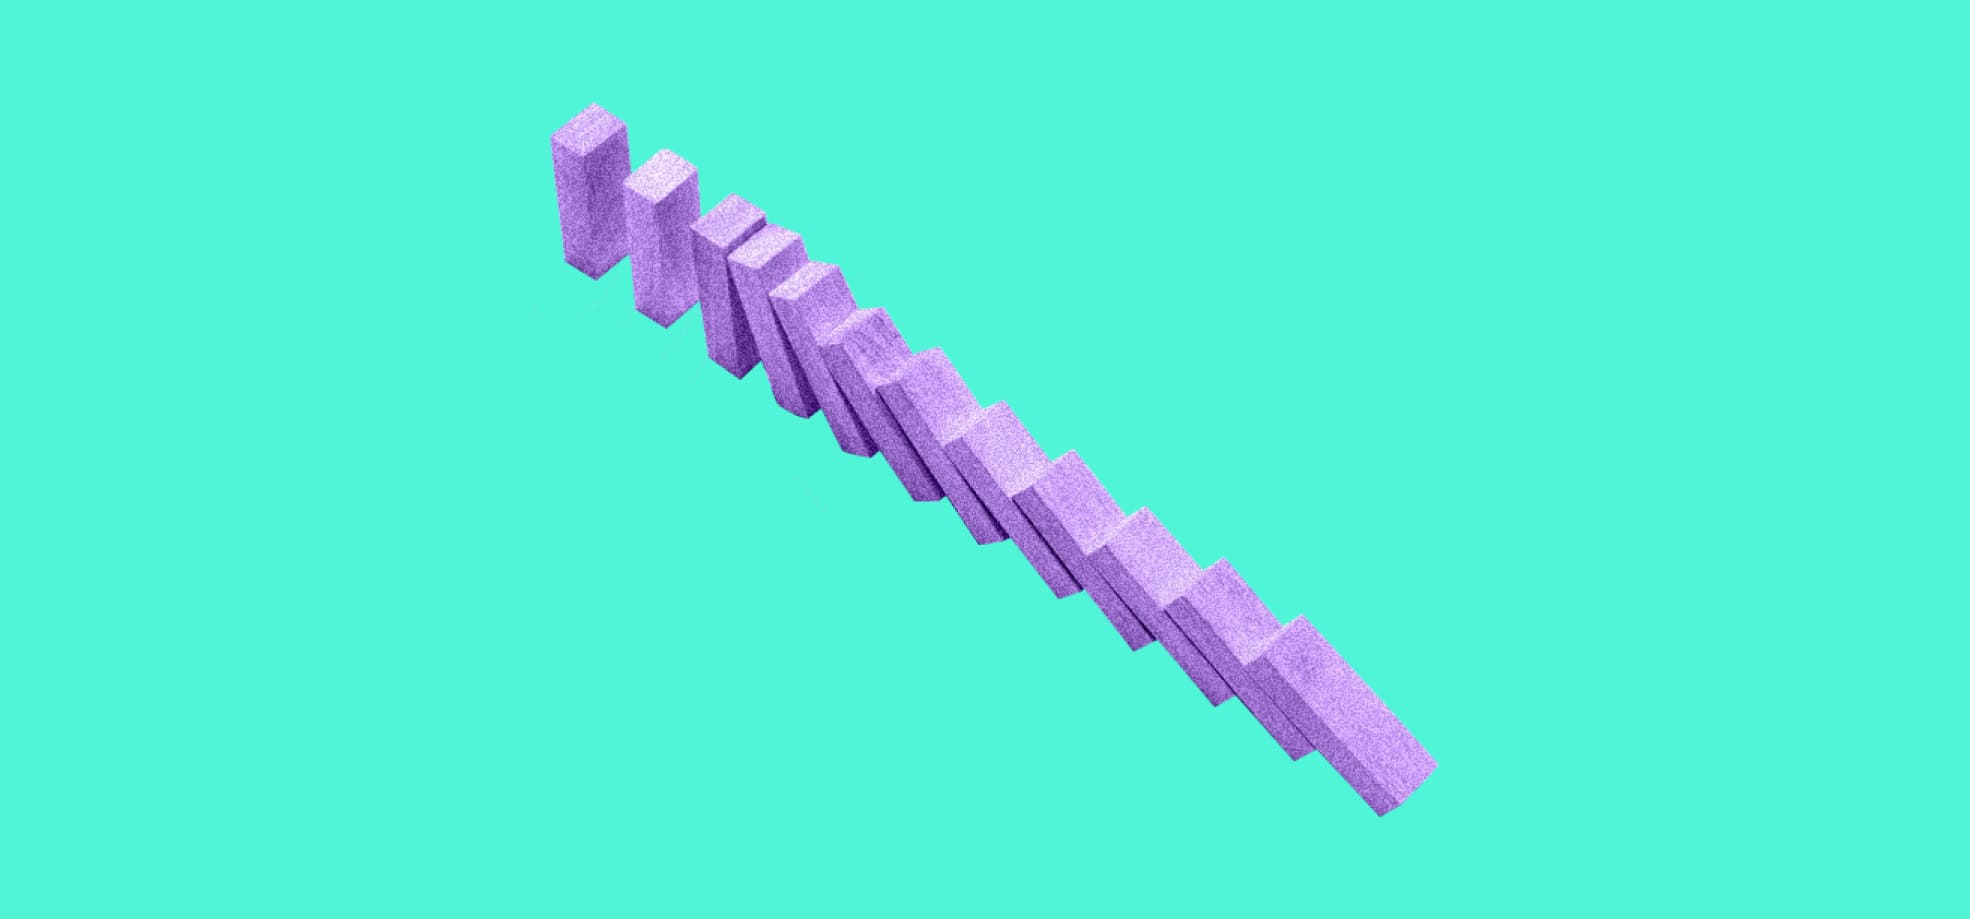 blue domino effect illustration on a purple background